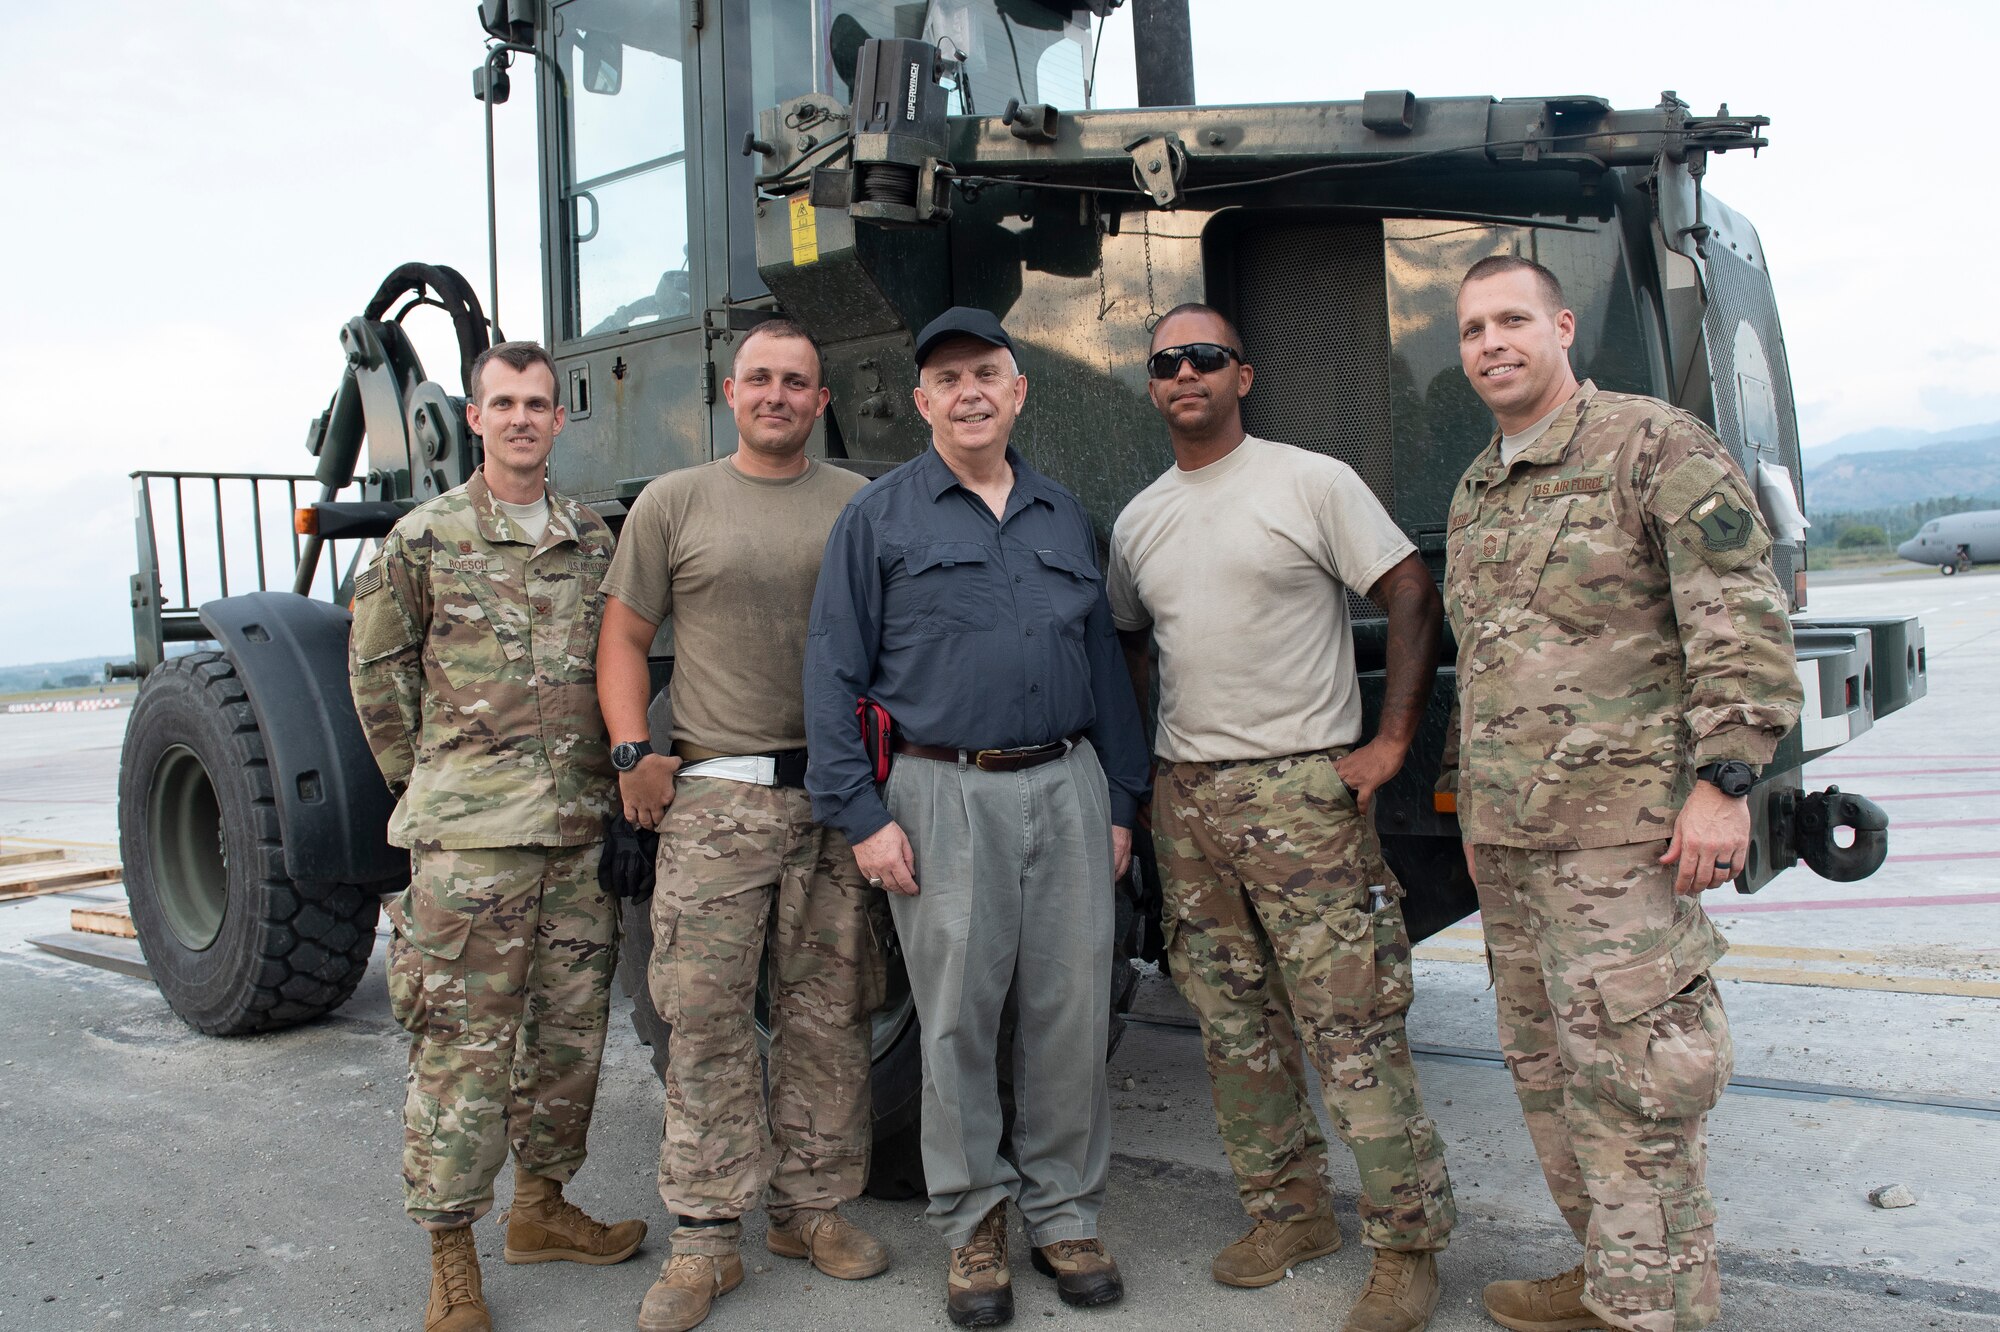 U.S. Ambassador to Indonesia, Joseph R. Donovan Jr. poses with Col. Daniel Roesch, 36th Contingency Response Group commander, Tech. Sgts. Edward Feilen, Christopher Johnson, both assigned to the 36th Mobility Response Squadron, and Chief Master Sgt. William Hebb, 36th CRG superintendent, in Palu, Indonesia Oct. 15, 2018. The purpose of Donovan’s visit was to thank 36th CRG Airmen and conduct site visits of humanitarian operations in Palu, Halim and Balikpapan. (U.S. Air Force photo by Master Sgt. JT May III)